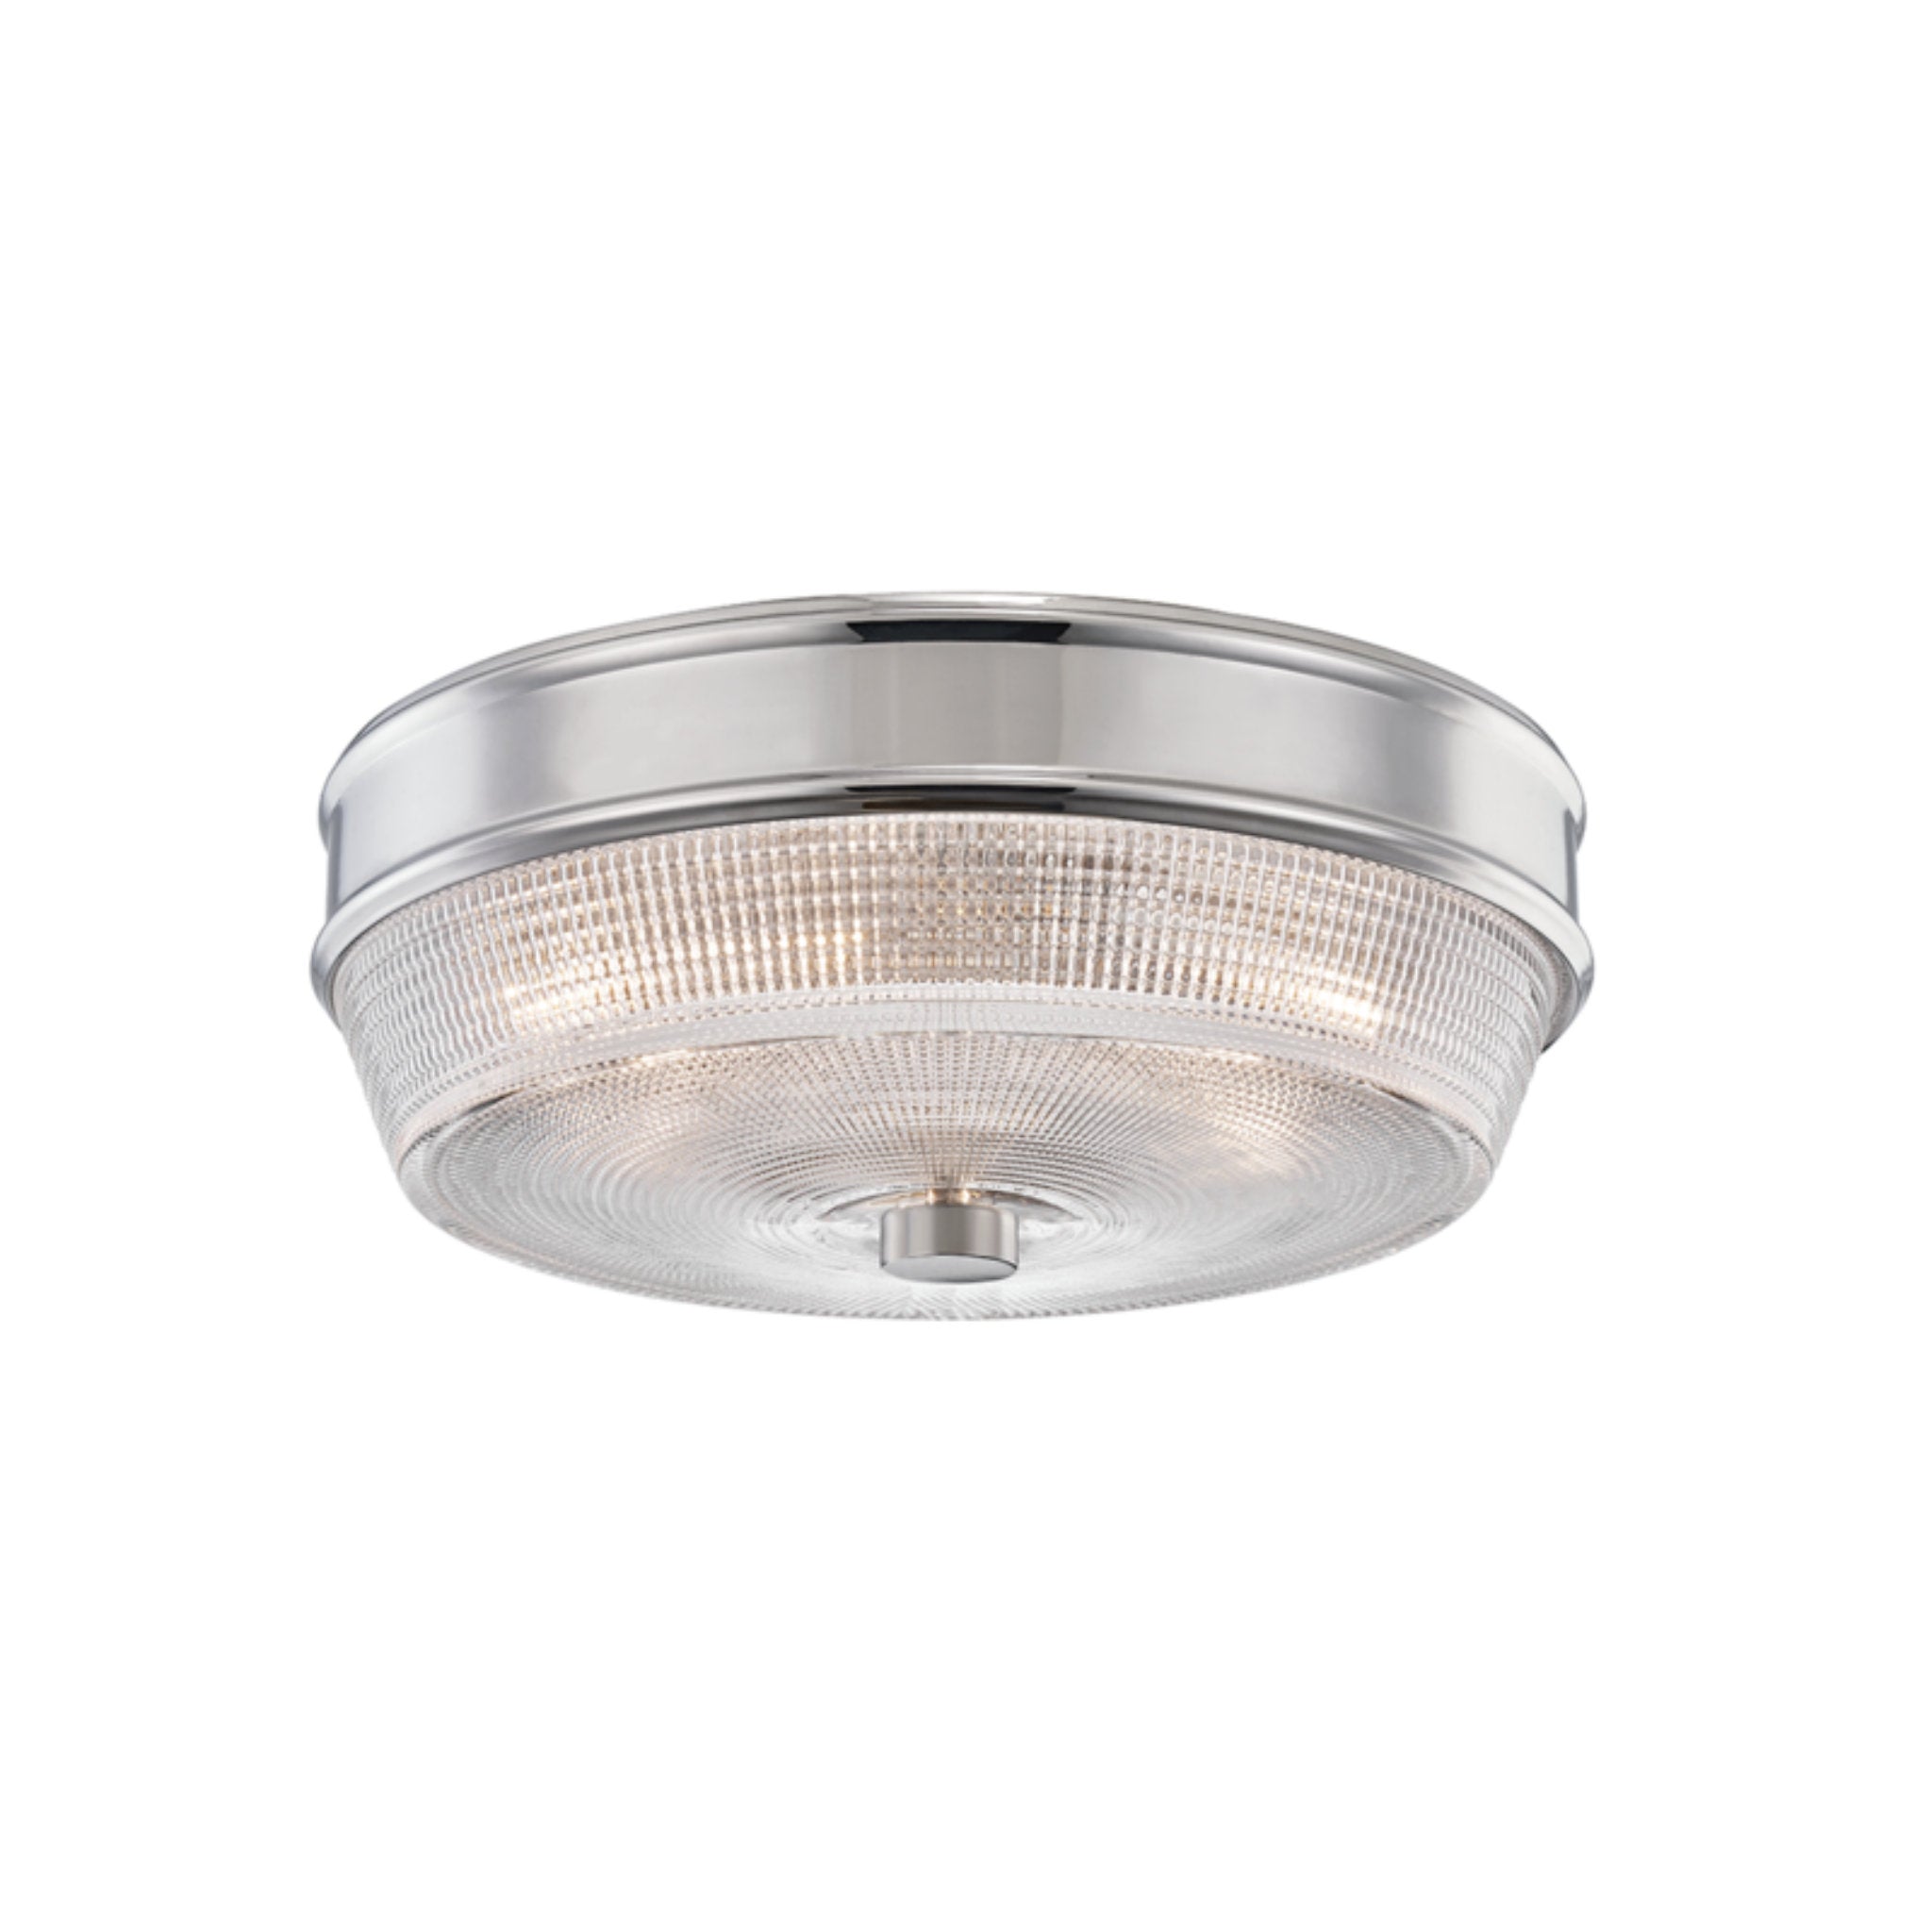 Lacey 2-Light Flush Mount in Polished Nickel